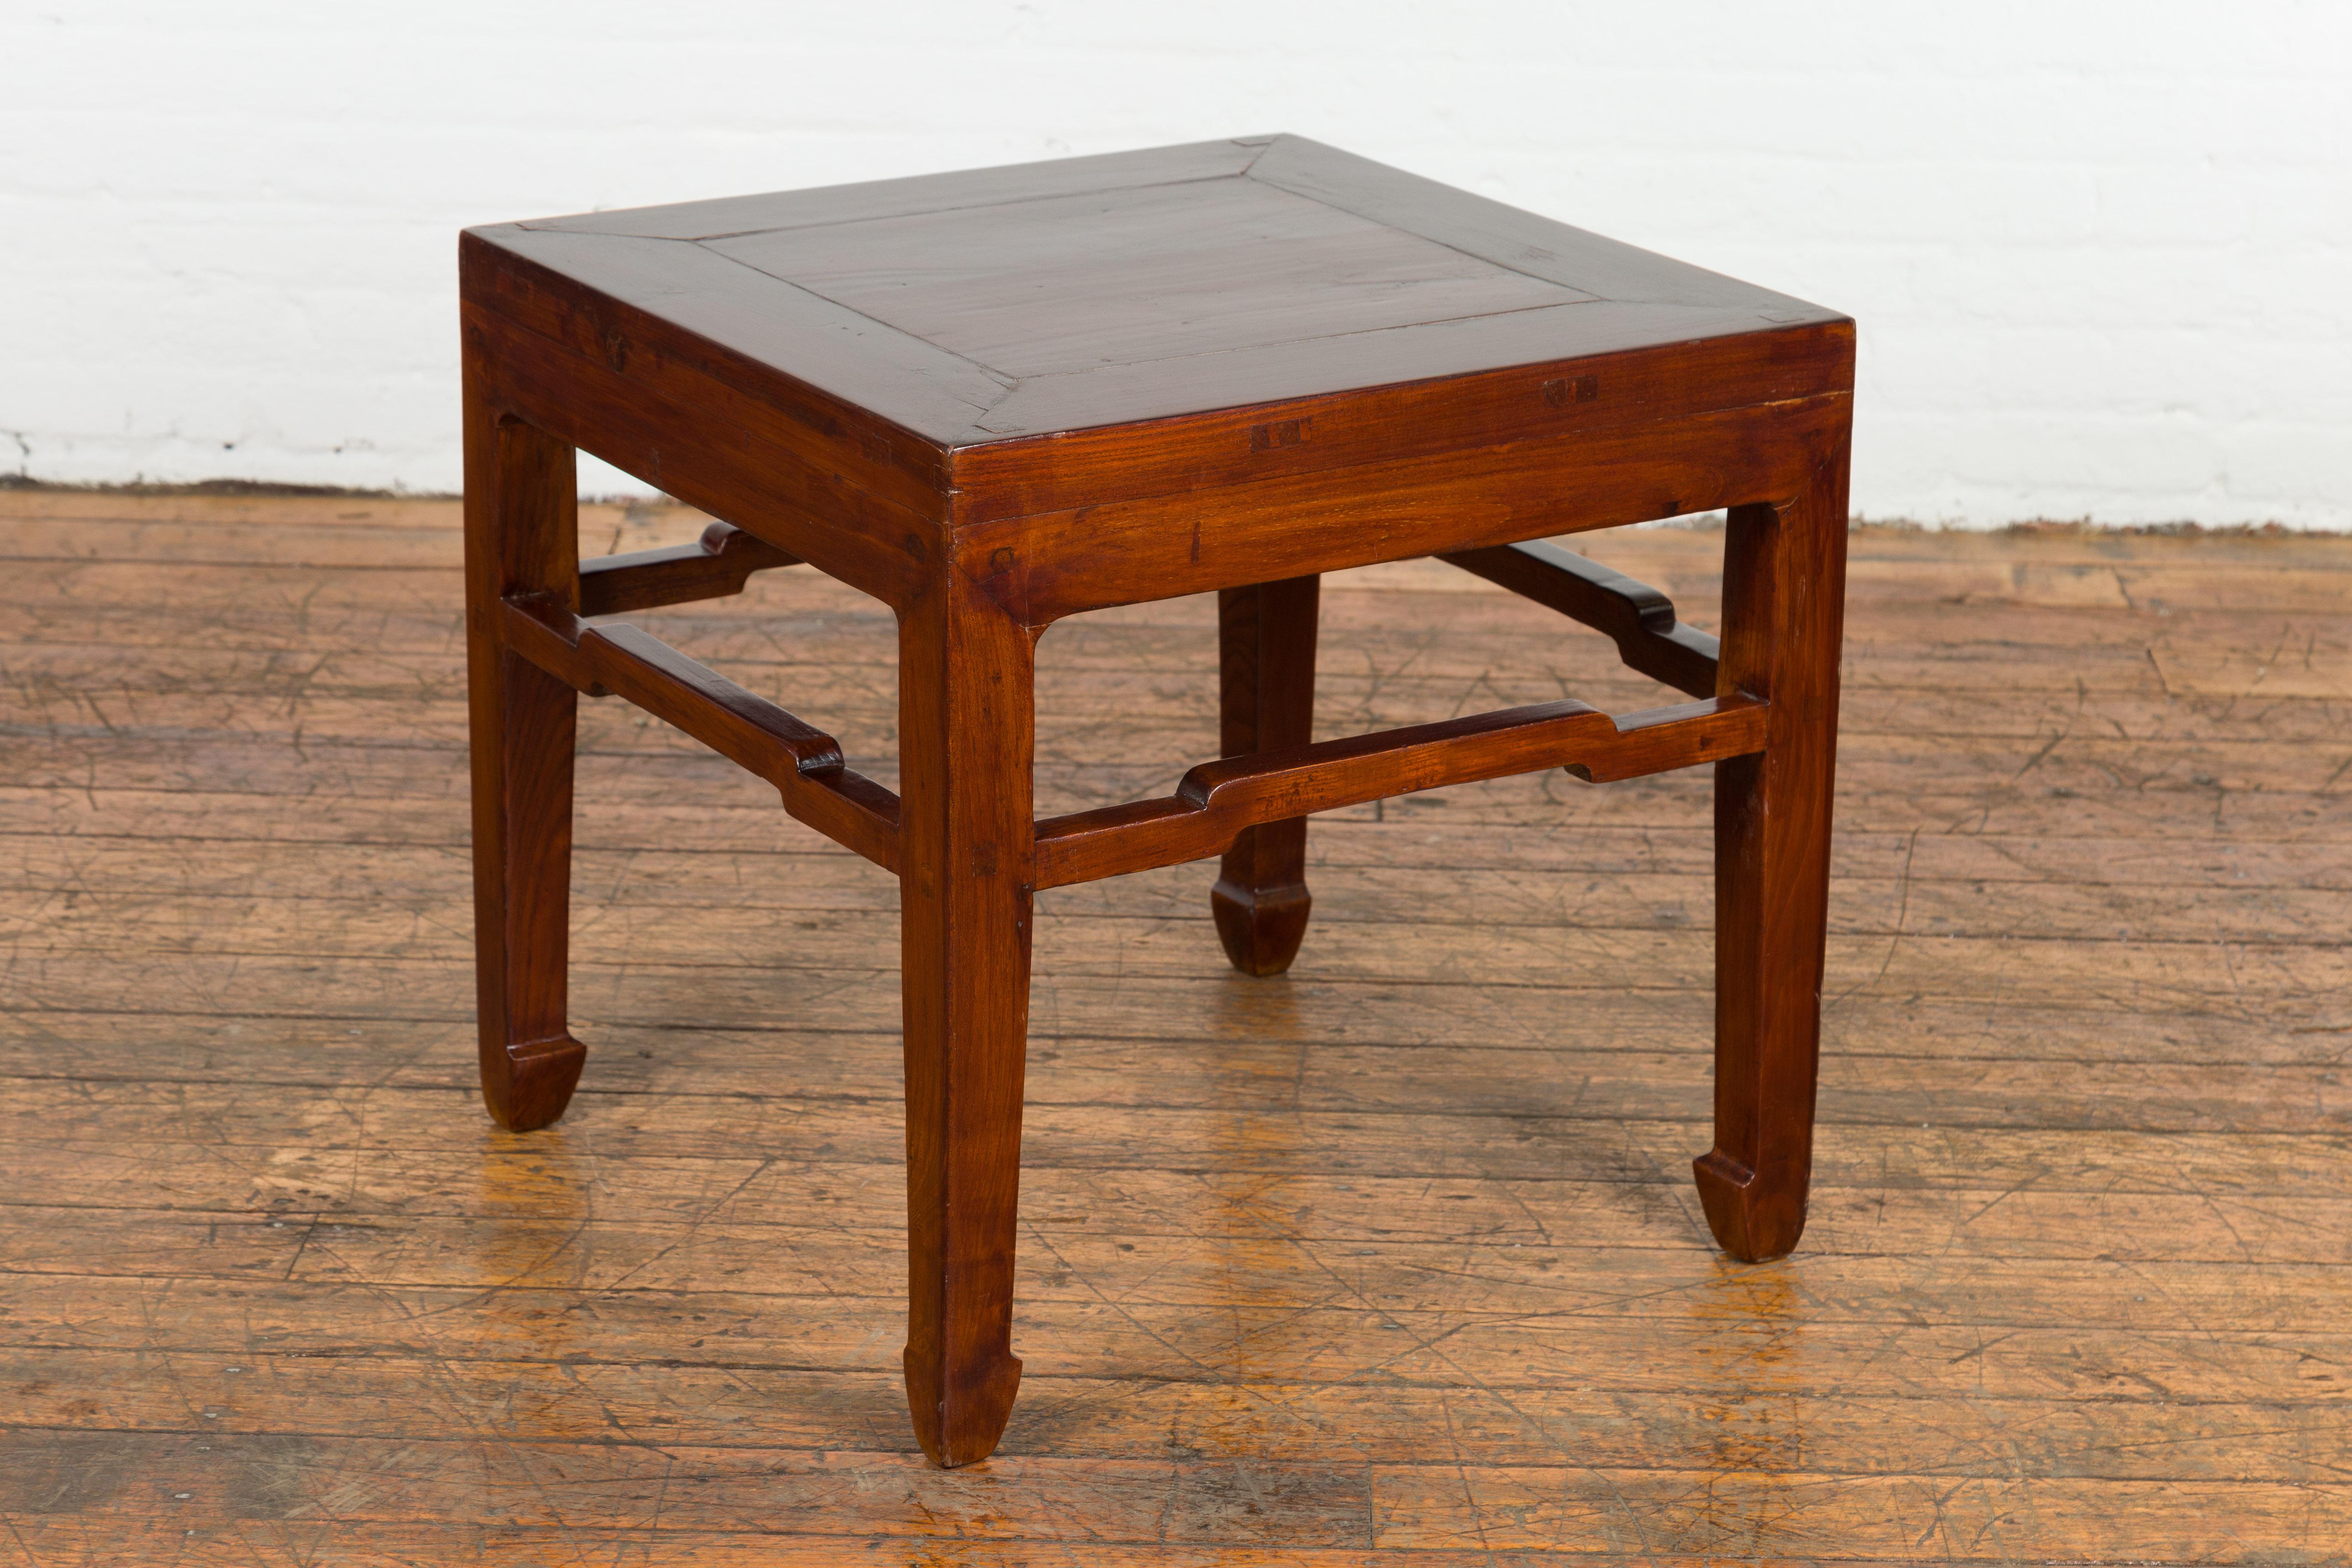 Chinese Qing Dynasty Period 19th Century Side Table with Humpback Stretchers For Sale 6